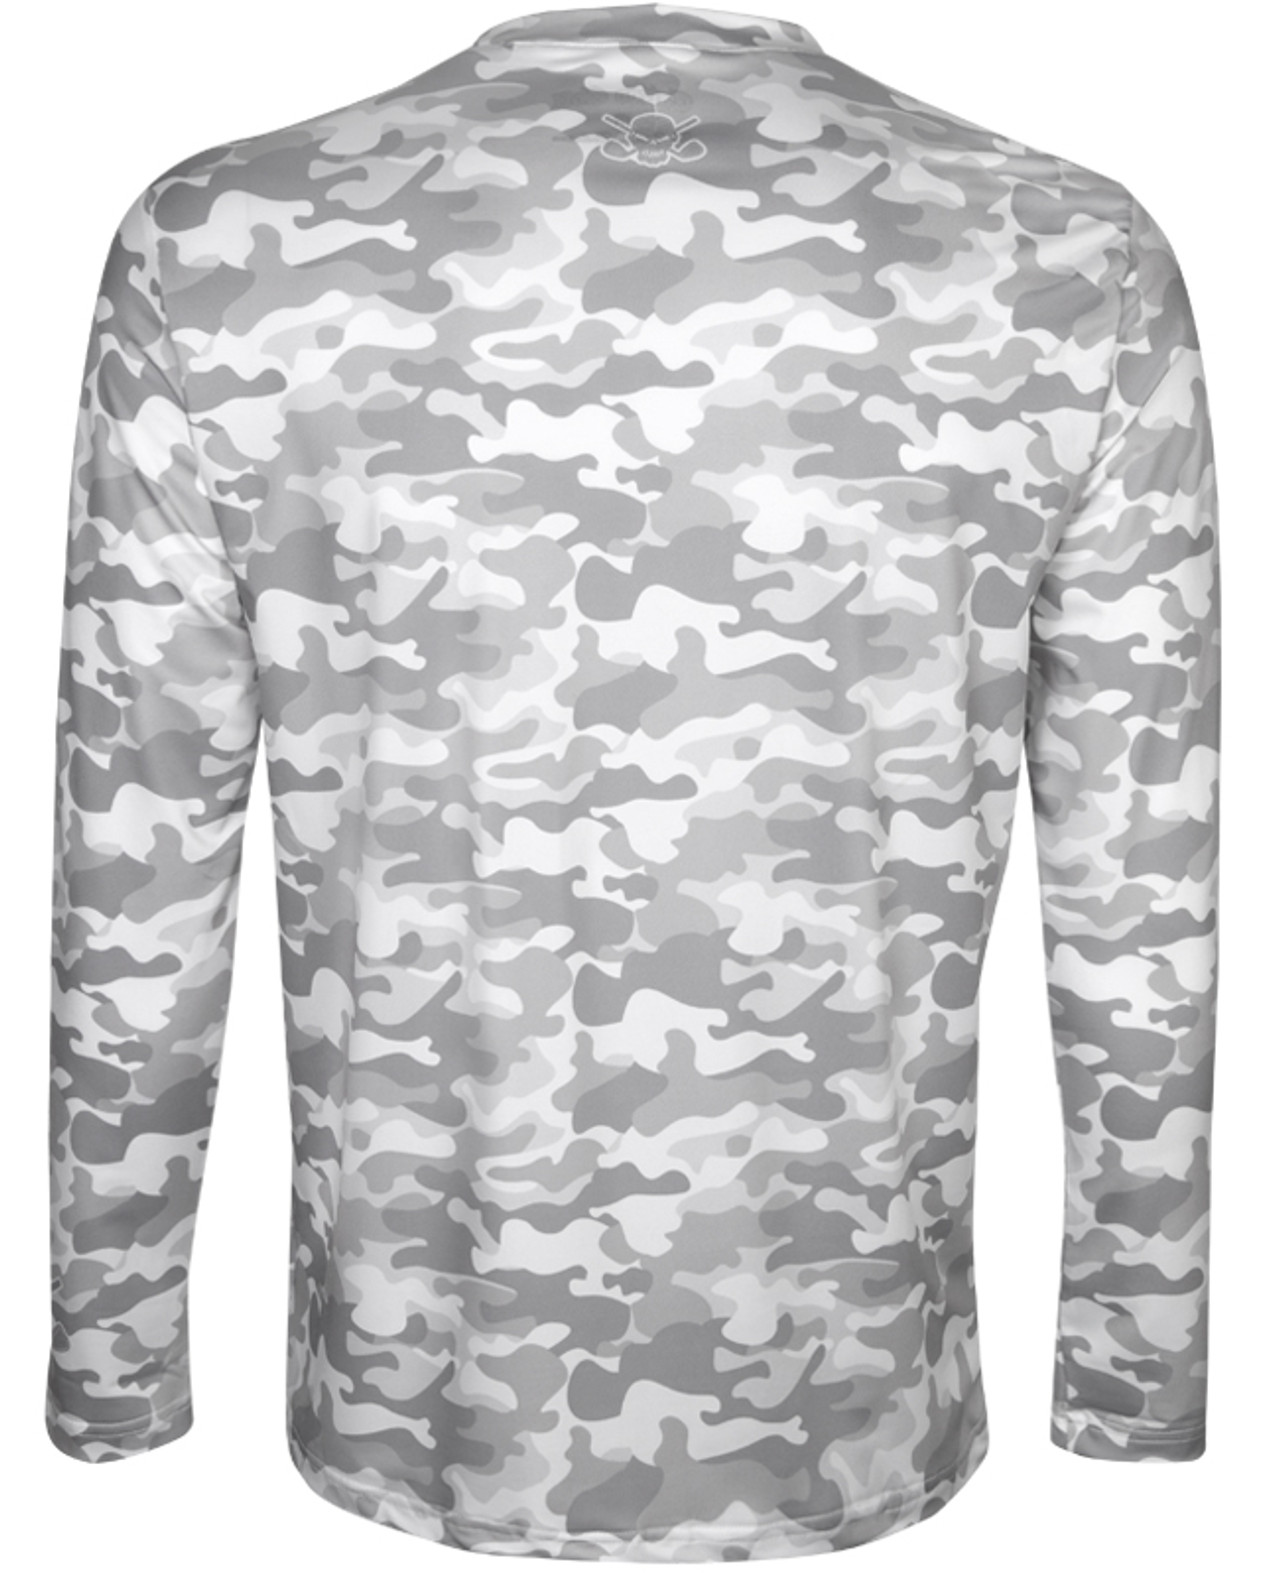 Camo print performance base layer shirt - skull designs with free shipping